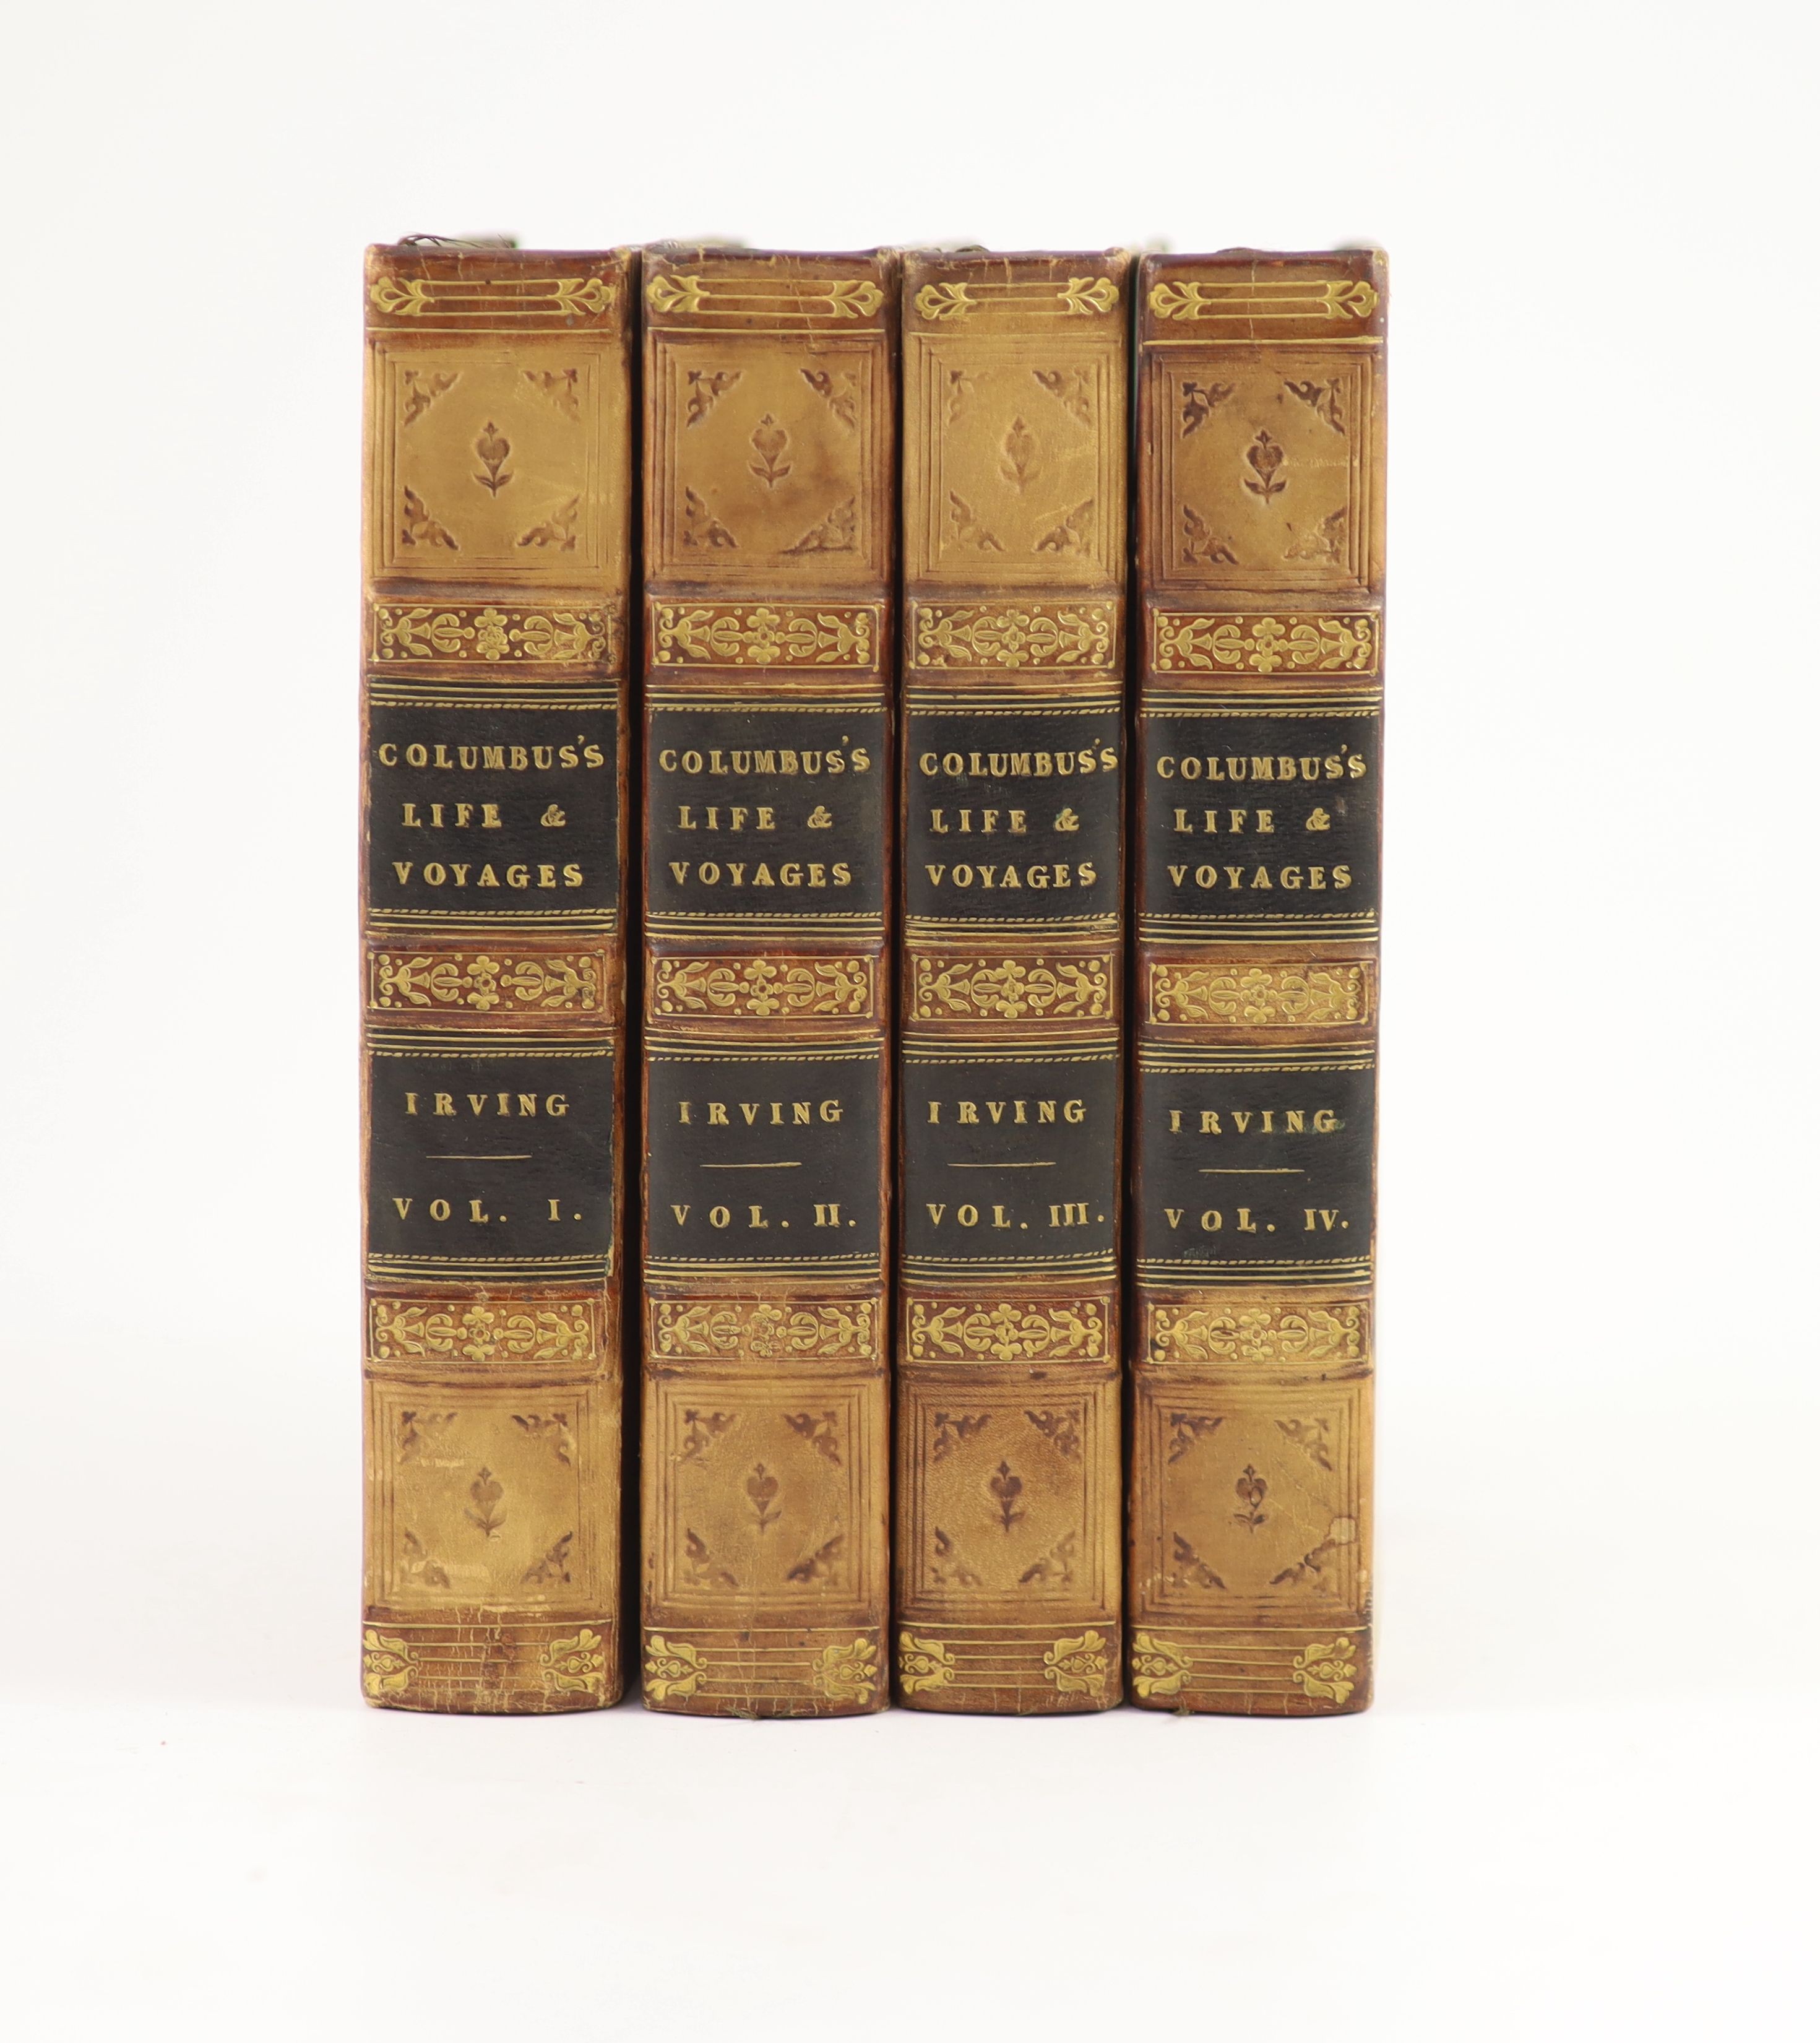 Irving, Washington - A History of the Life and Voyages of Christopher Columbus, 4 vols, 16mo, calf, with 2 folding maps, Baudry, Paris, 1828